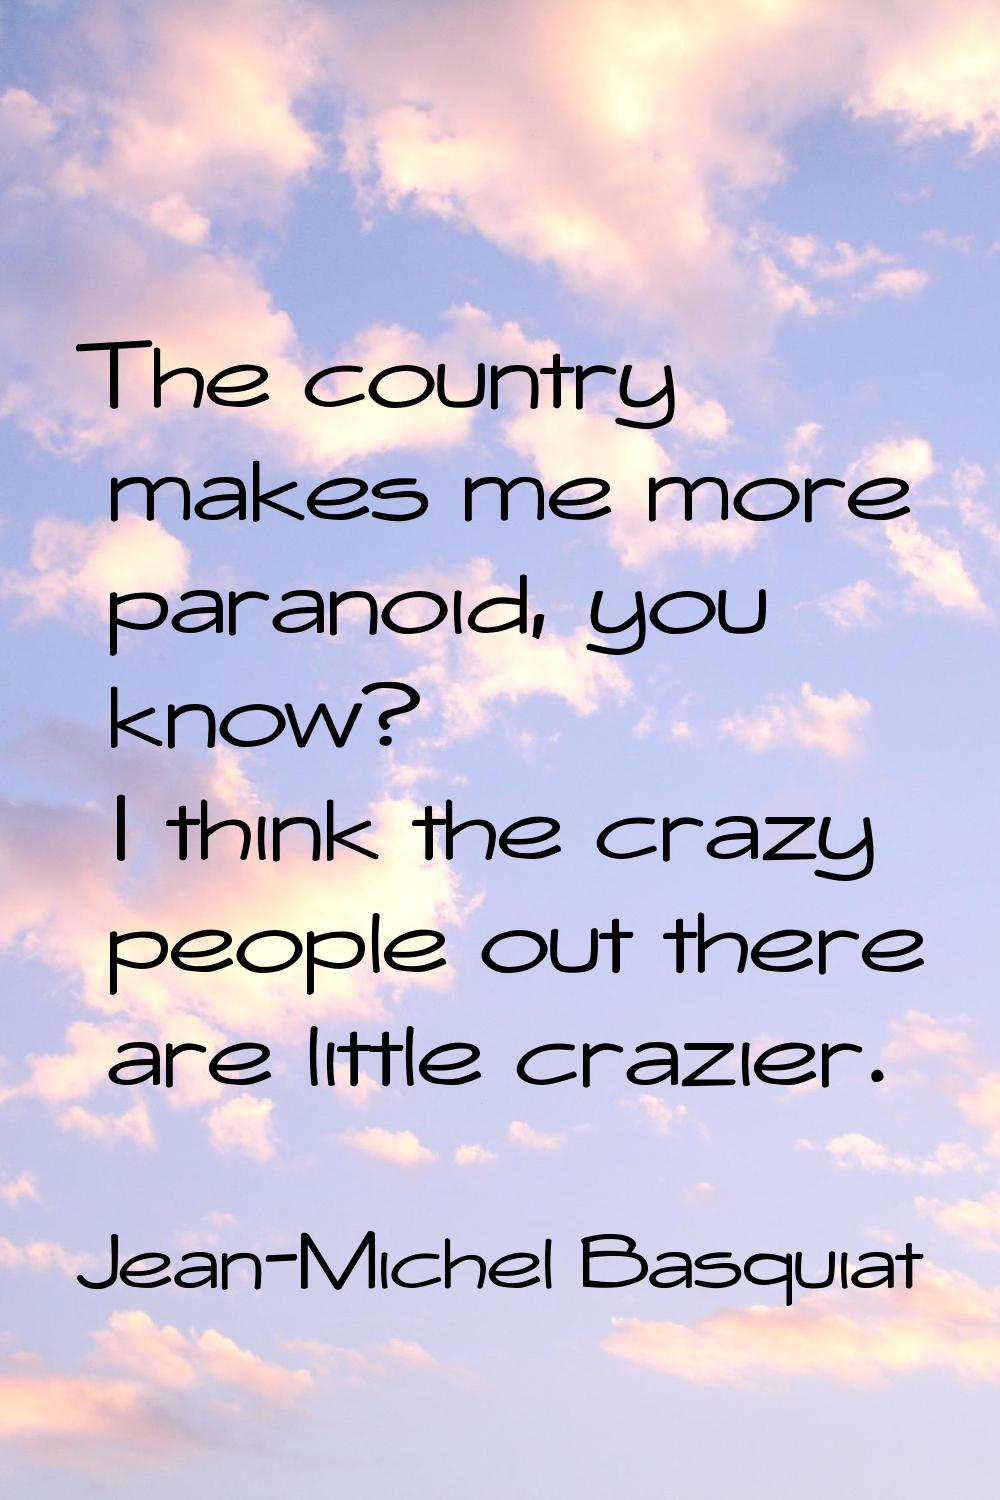 The country makes me more paranoid, you know? I think the crazy people out there are little crazier